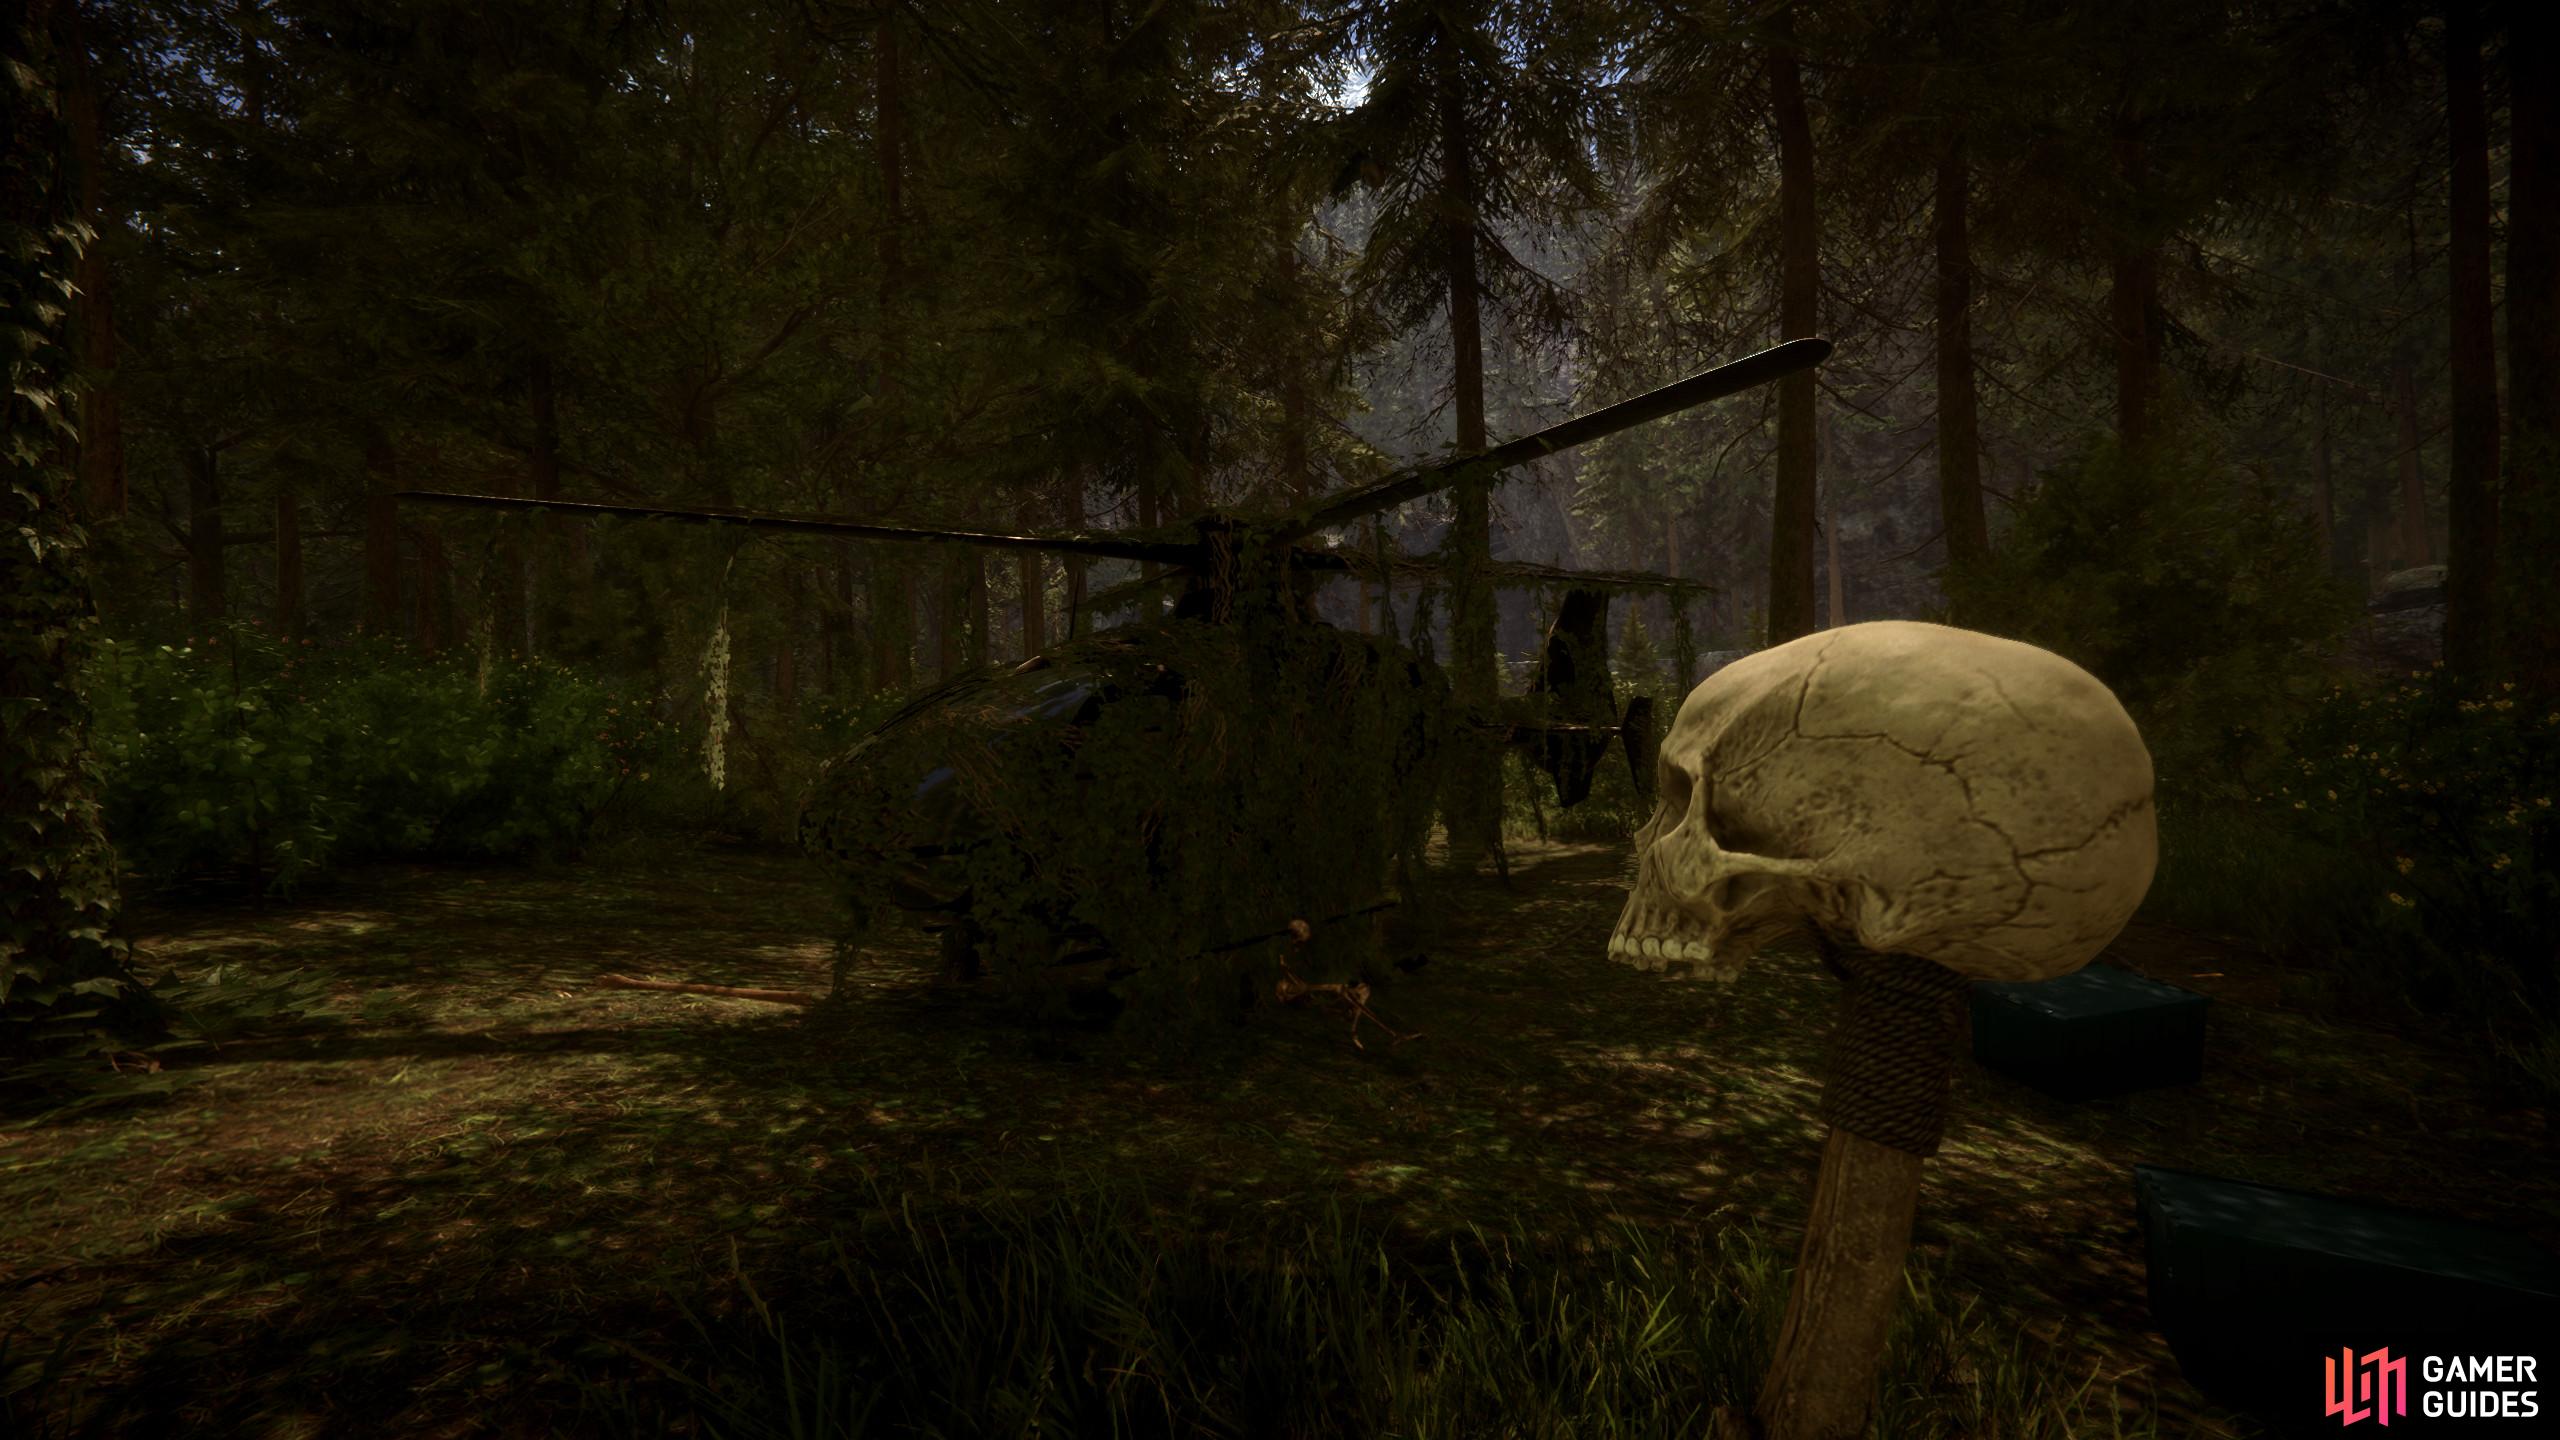 We’ll soon enter mutant town when the Sons of the Forest release time arrives. Image via Endnight.